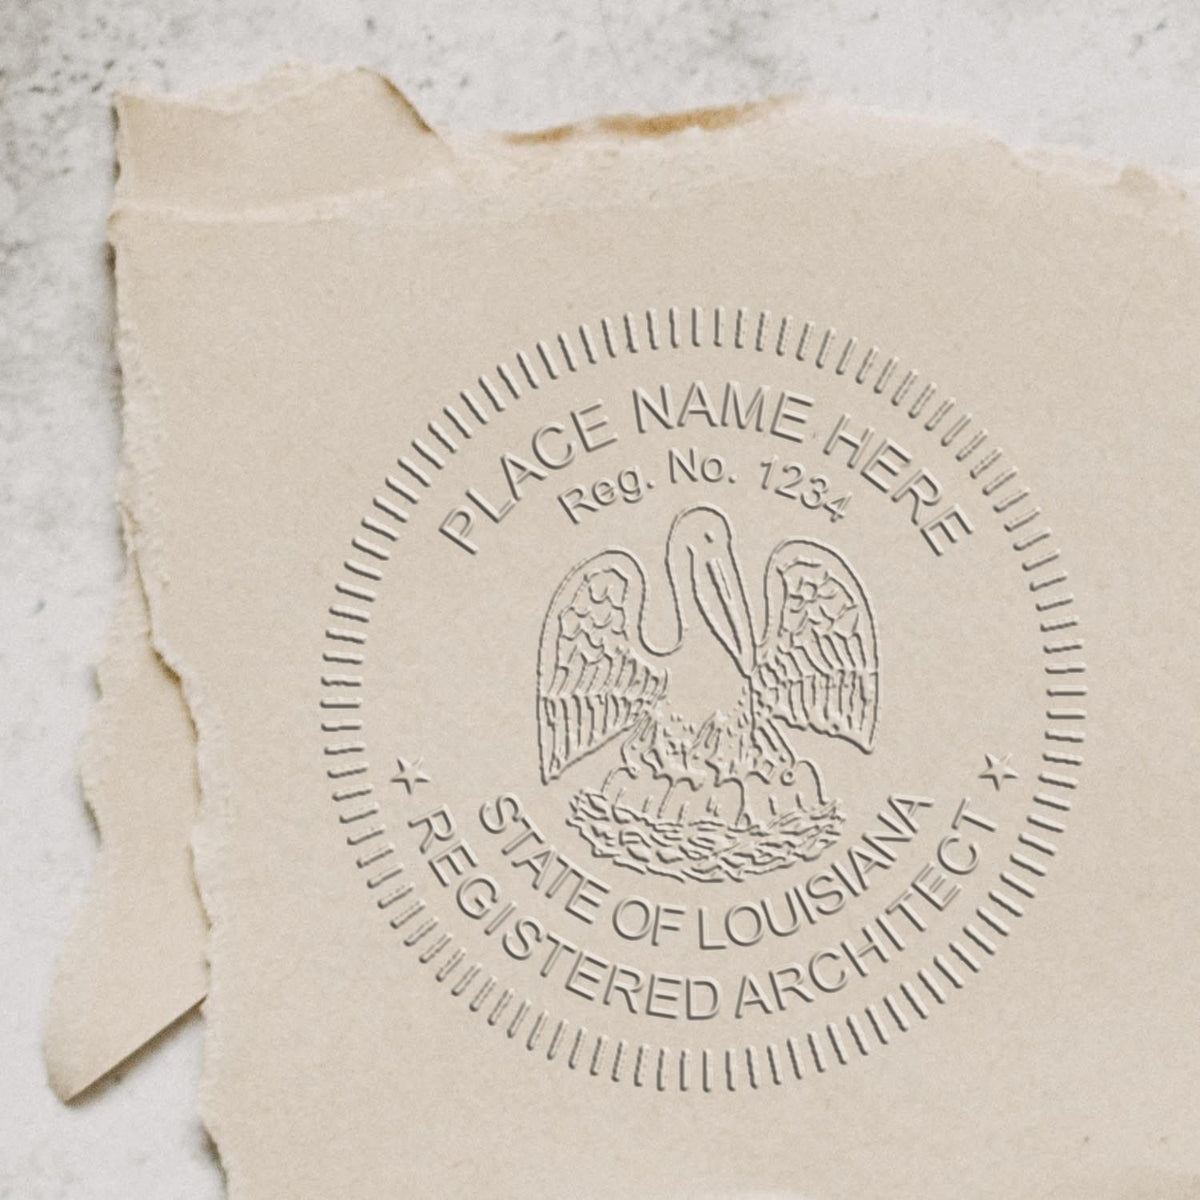 A stamped impression of the Louisiana Desk Architect Embossing Seal in this stylish lifestyle photo, setting the tone for a unique and personalized product.